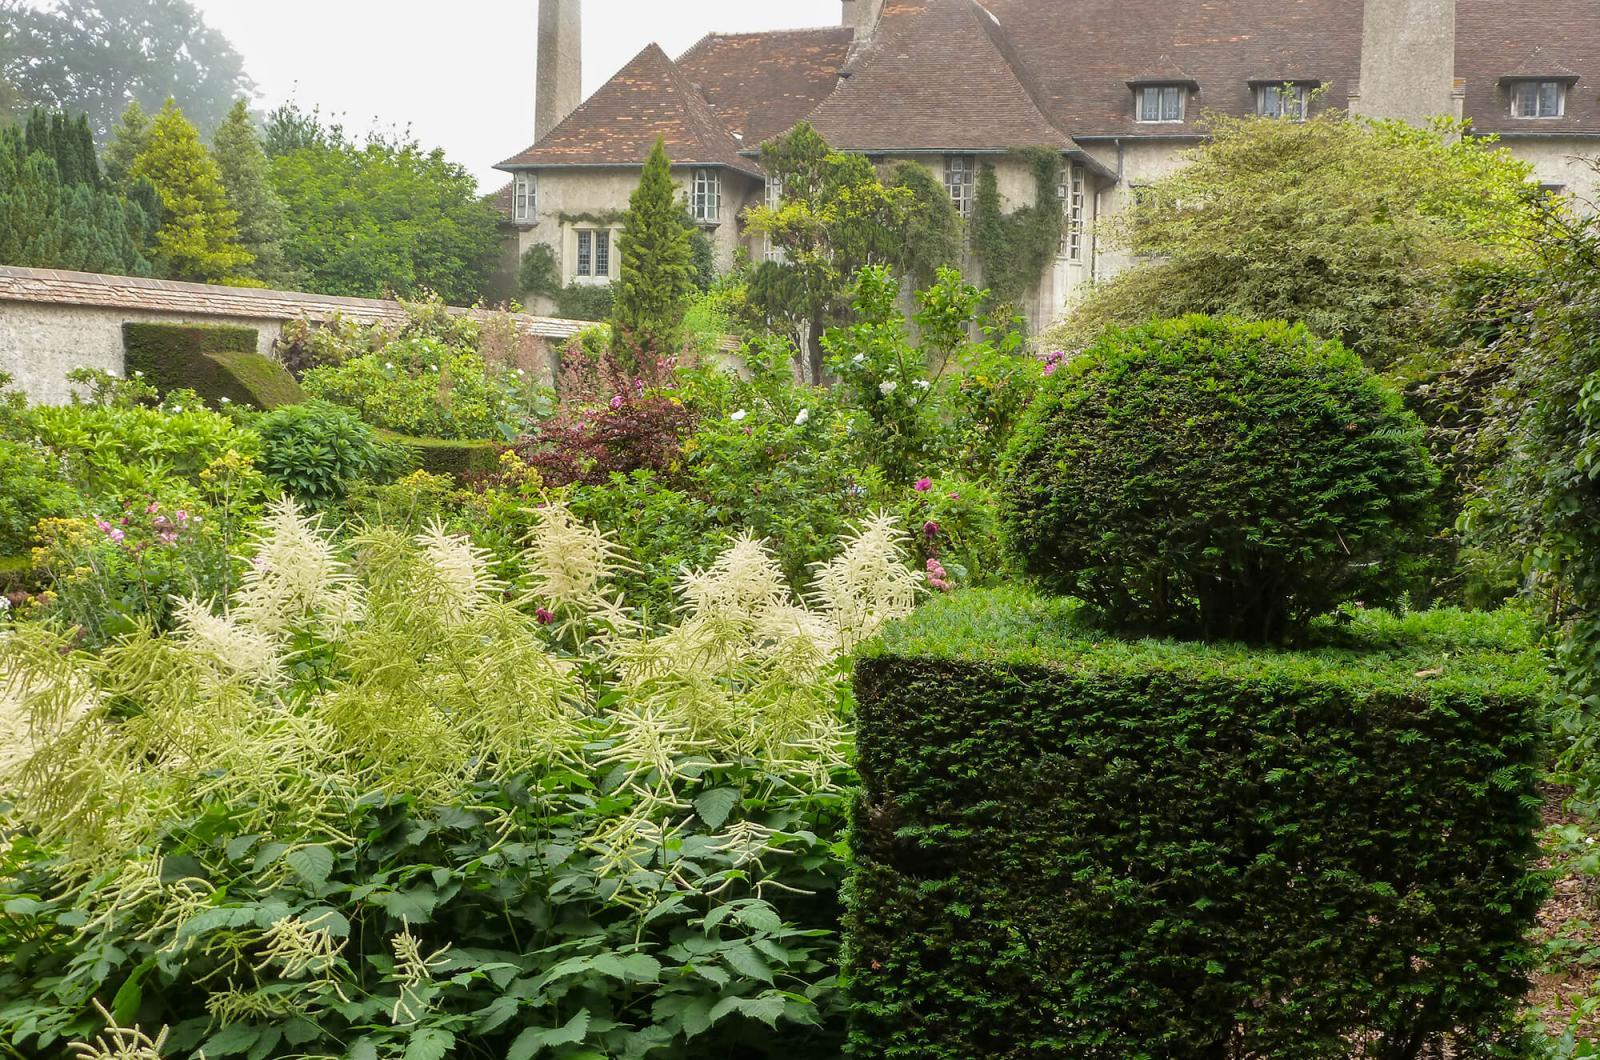 Photo #1: Le Bois des Moutiers is a country manor and garden built by Guillaume Mallet starting in 1898, with the Arts and Crafts design team of Gertrude Jekyll and Edwin Lutyens.